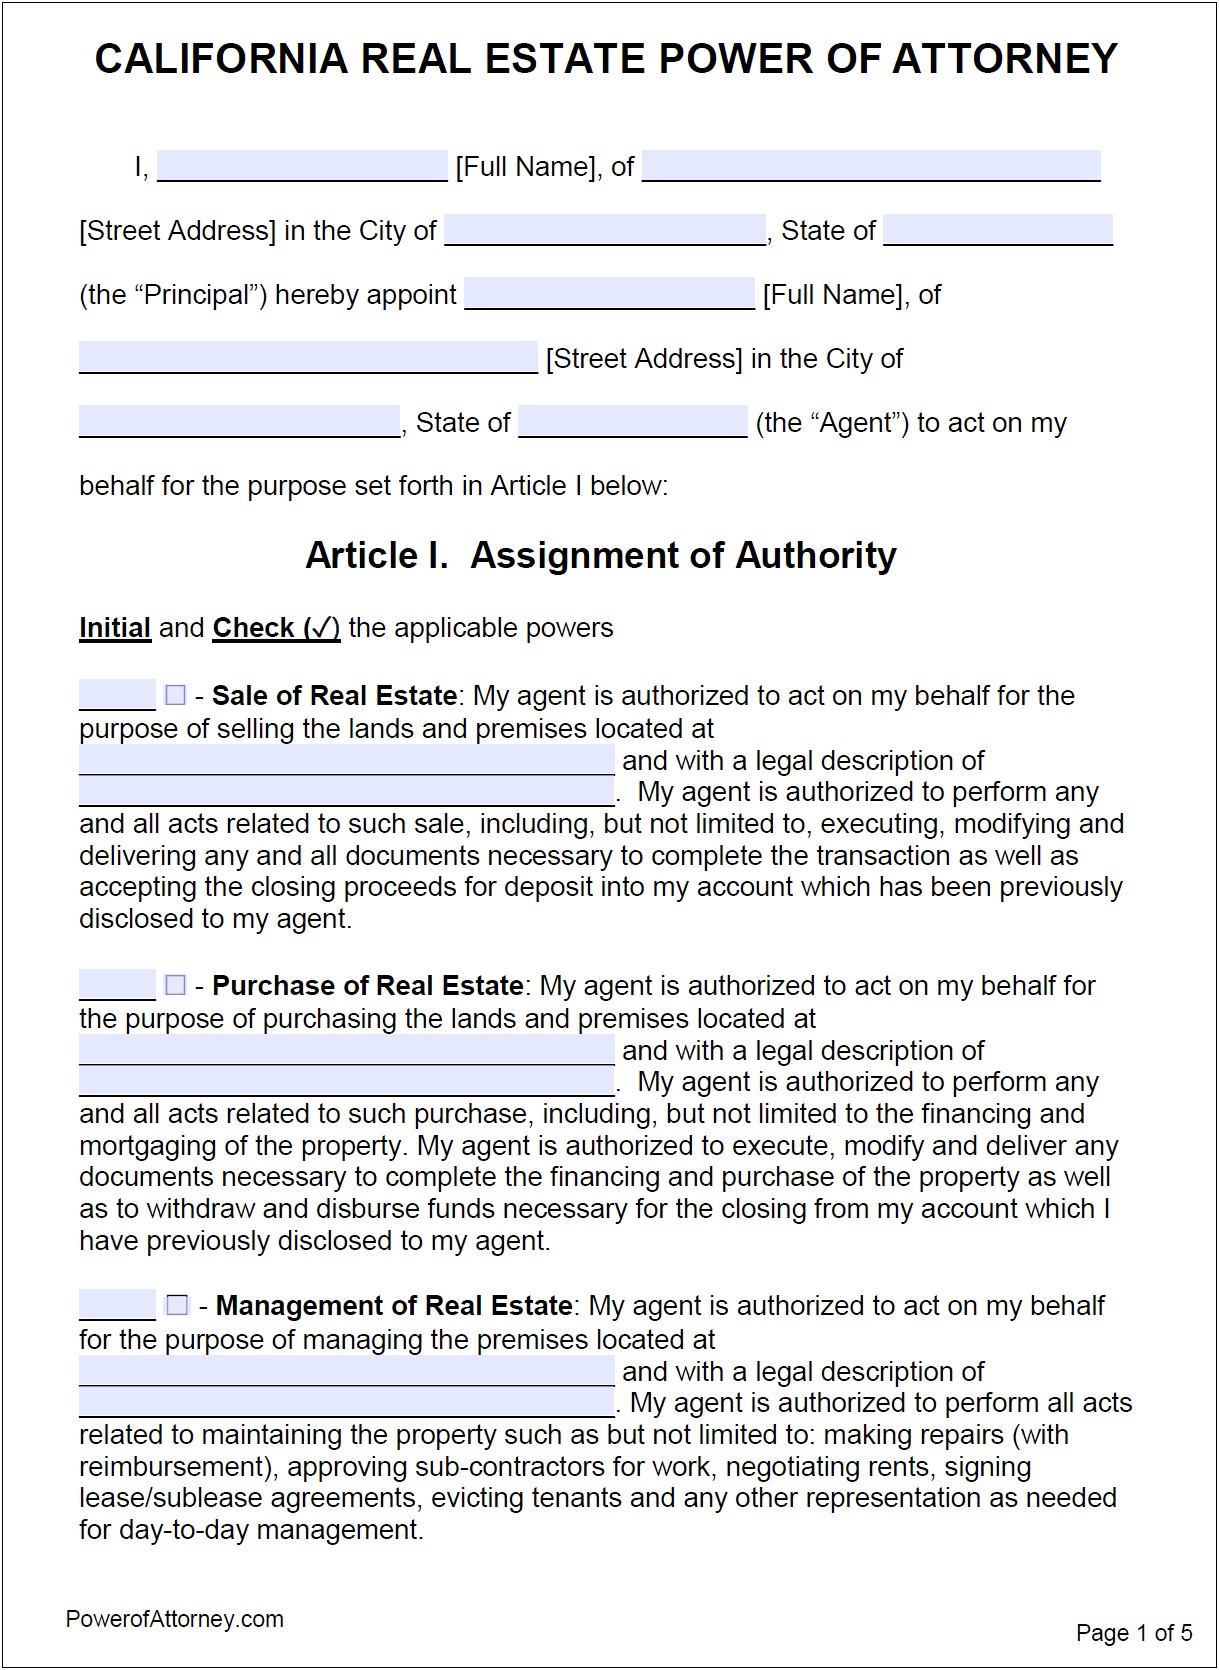 Free Limited Power Of Attorney Word Template California